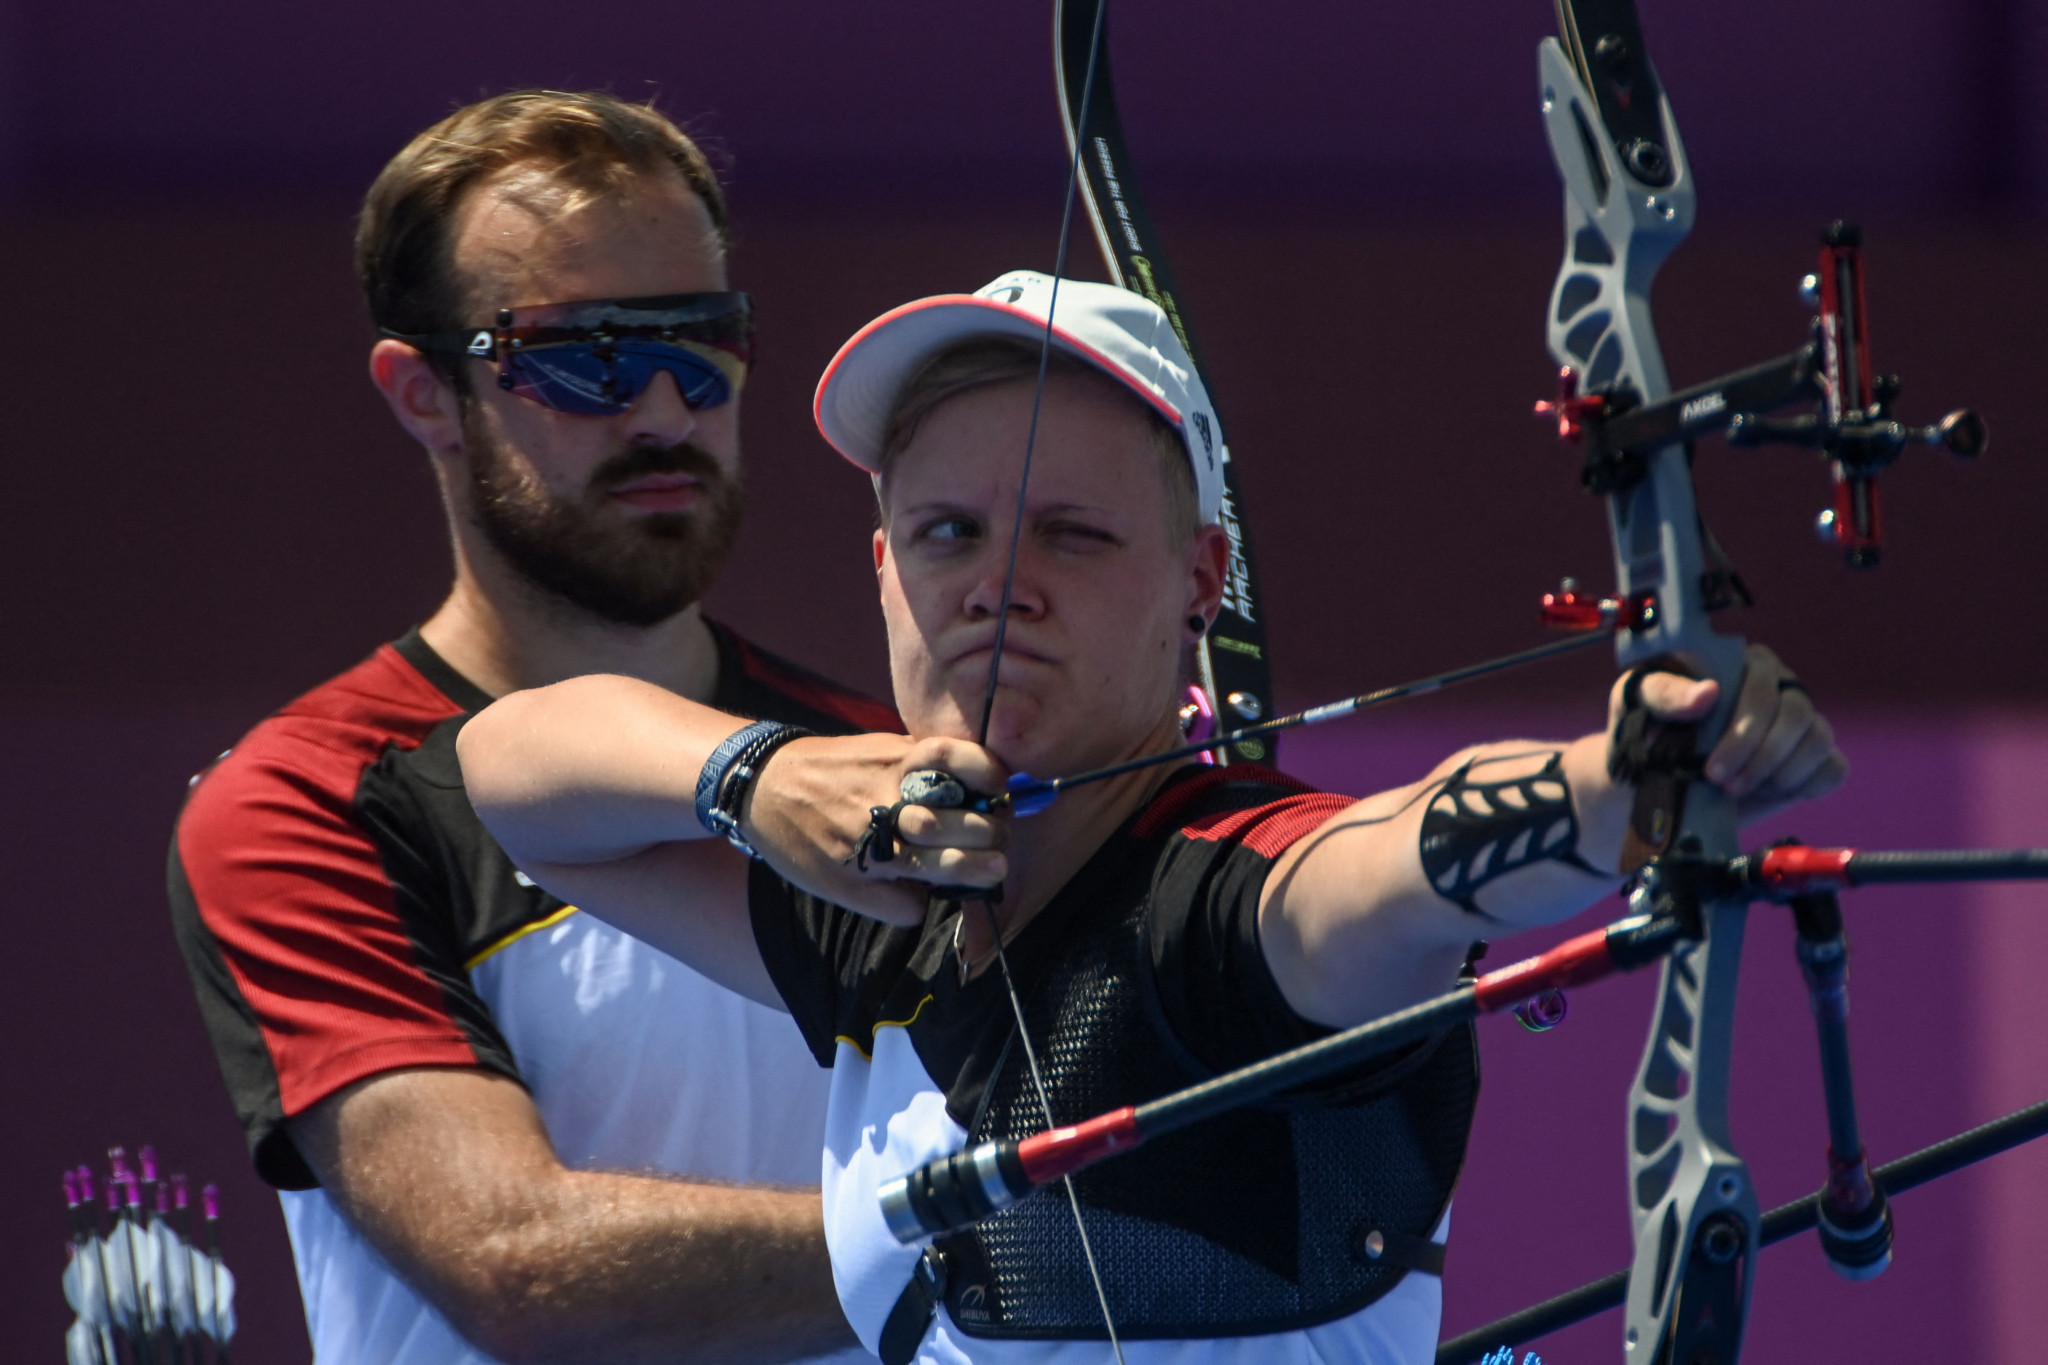 Mixed team finalists confirmed at European Archery Championships